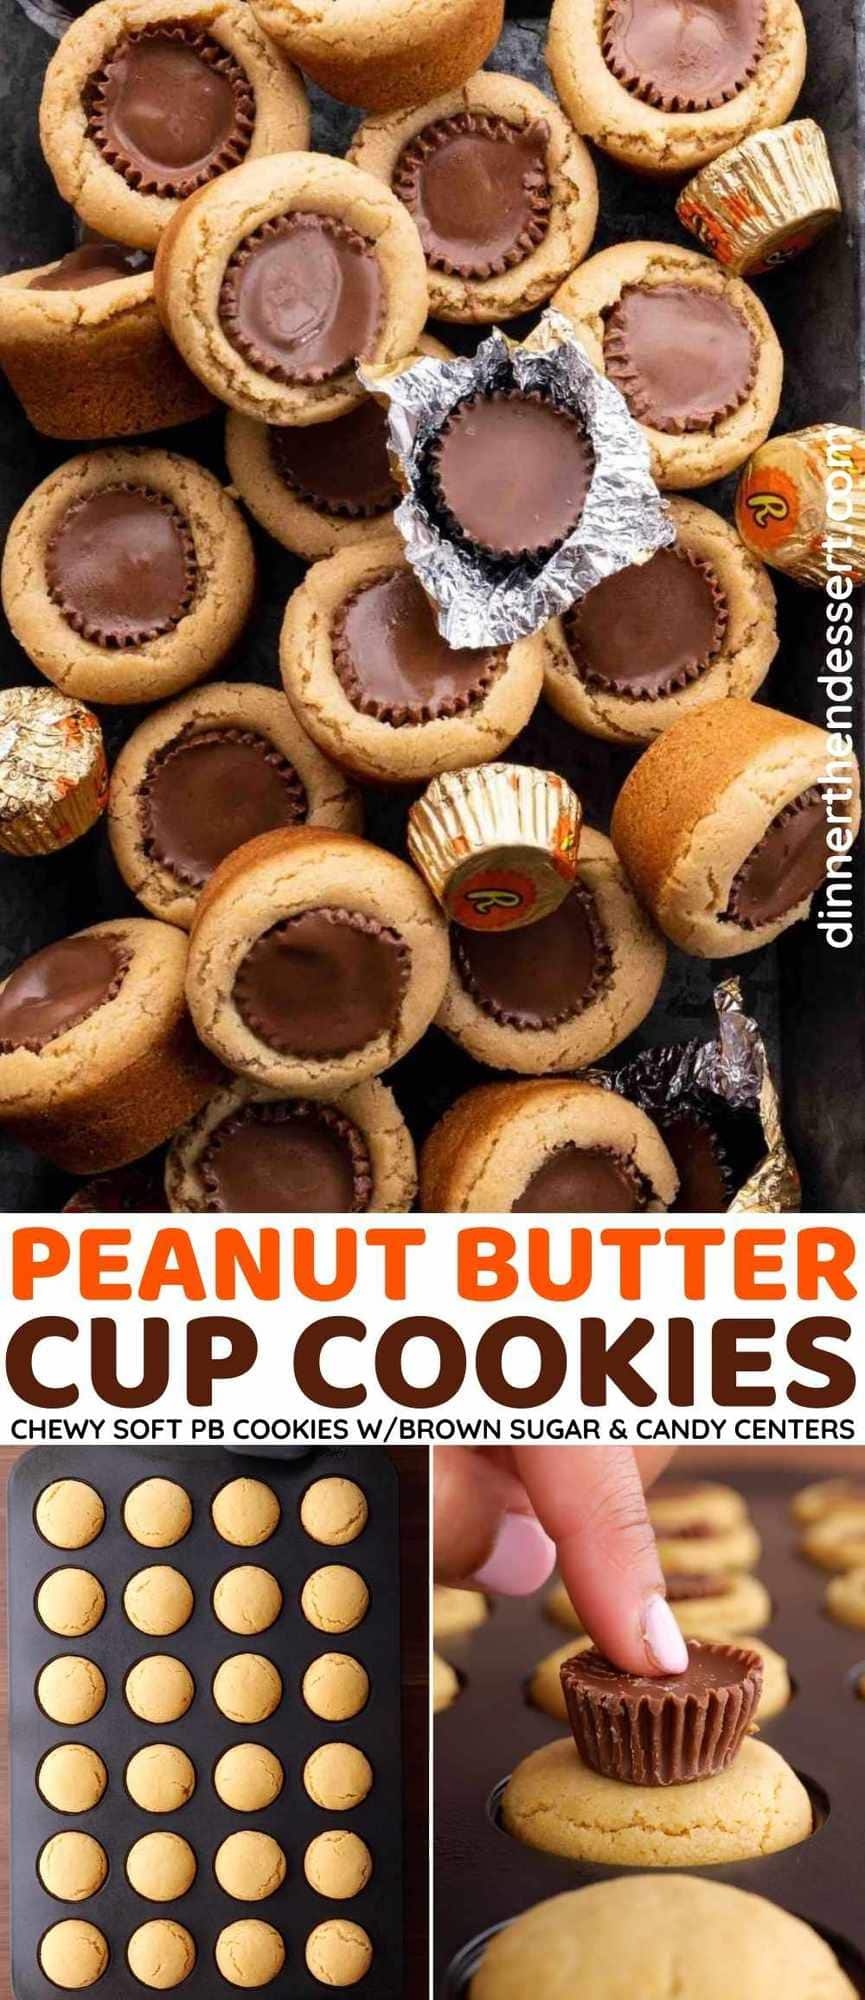 Peanut Butter Cup Cookies Collage